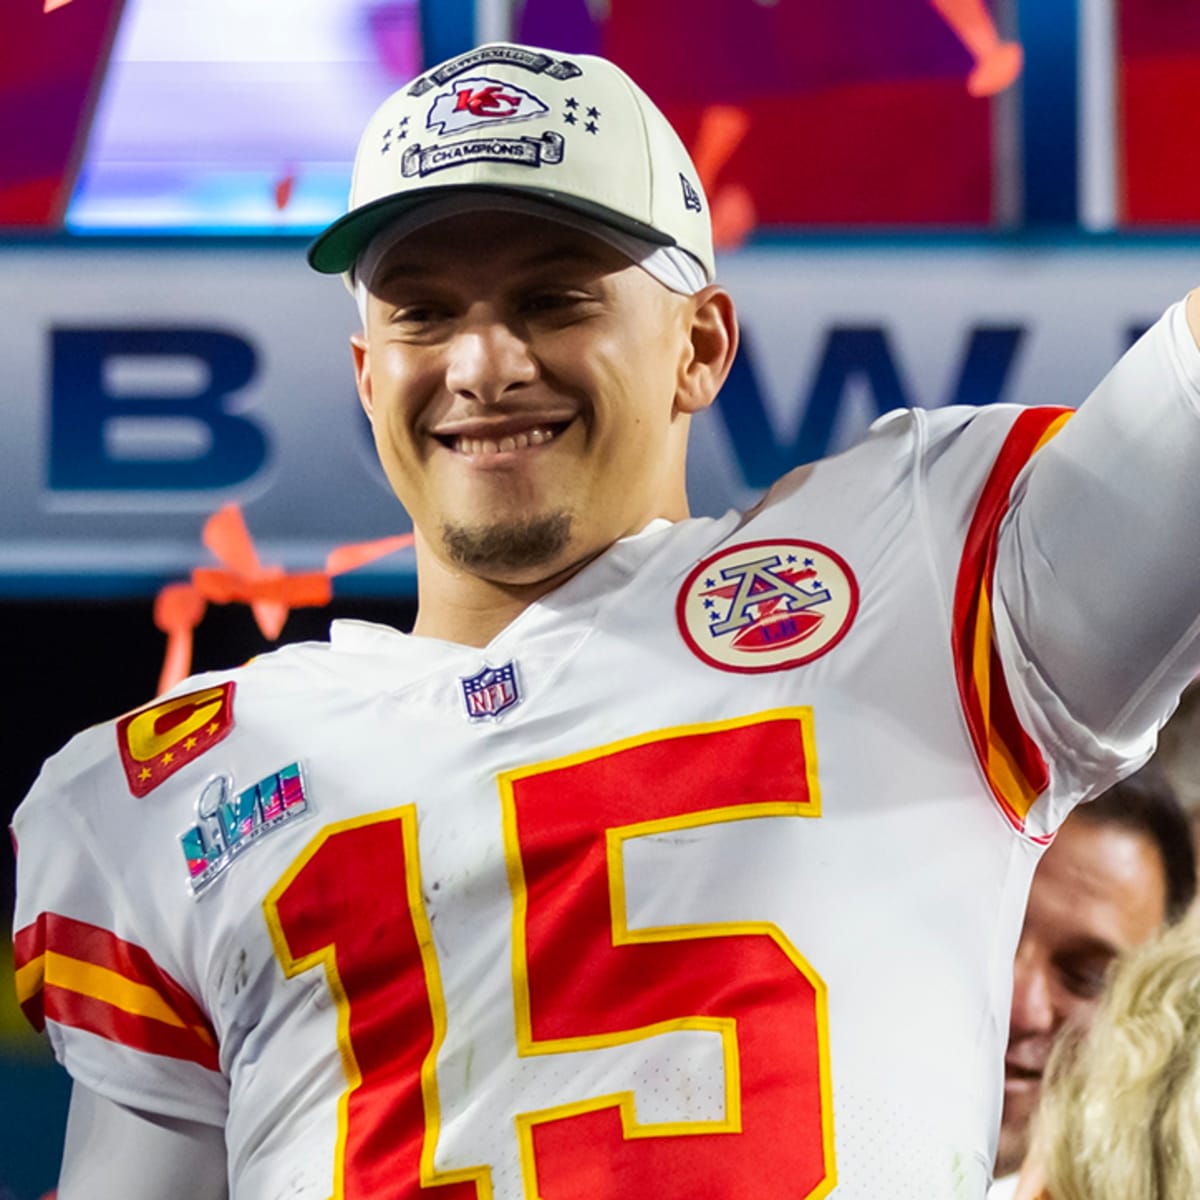 Chiefs star Patrick Mahomes has put KC home up for sale. Take a